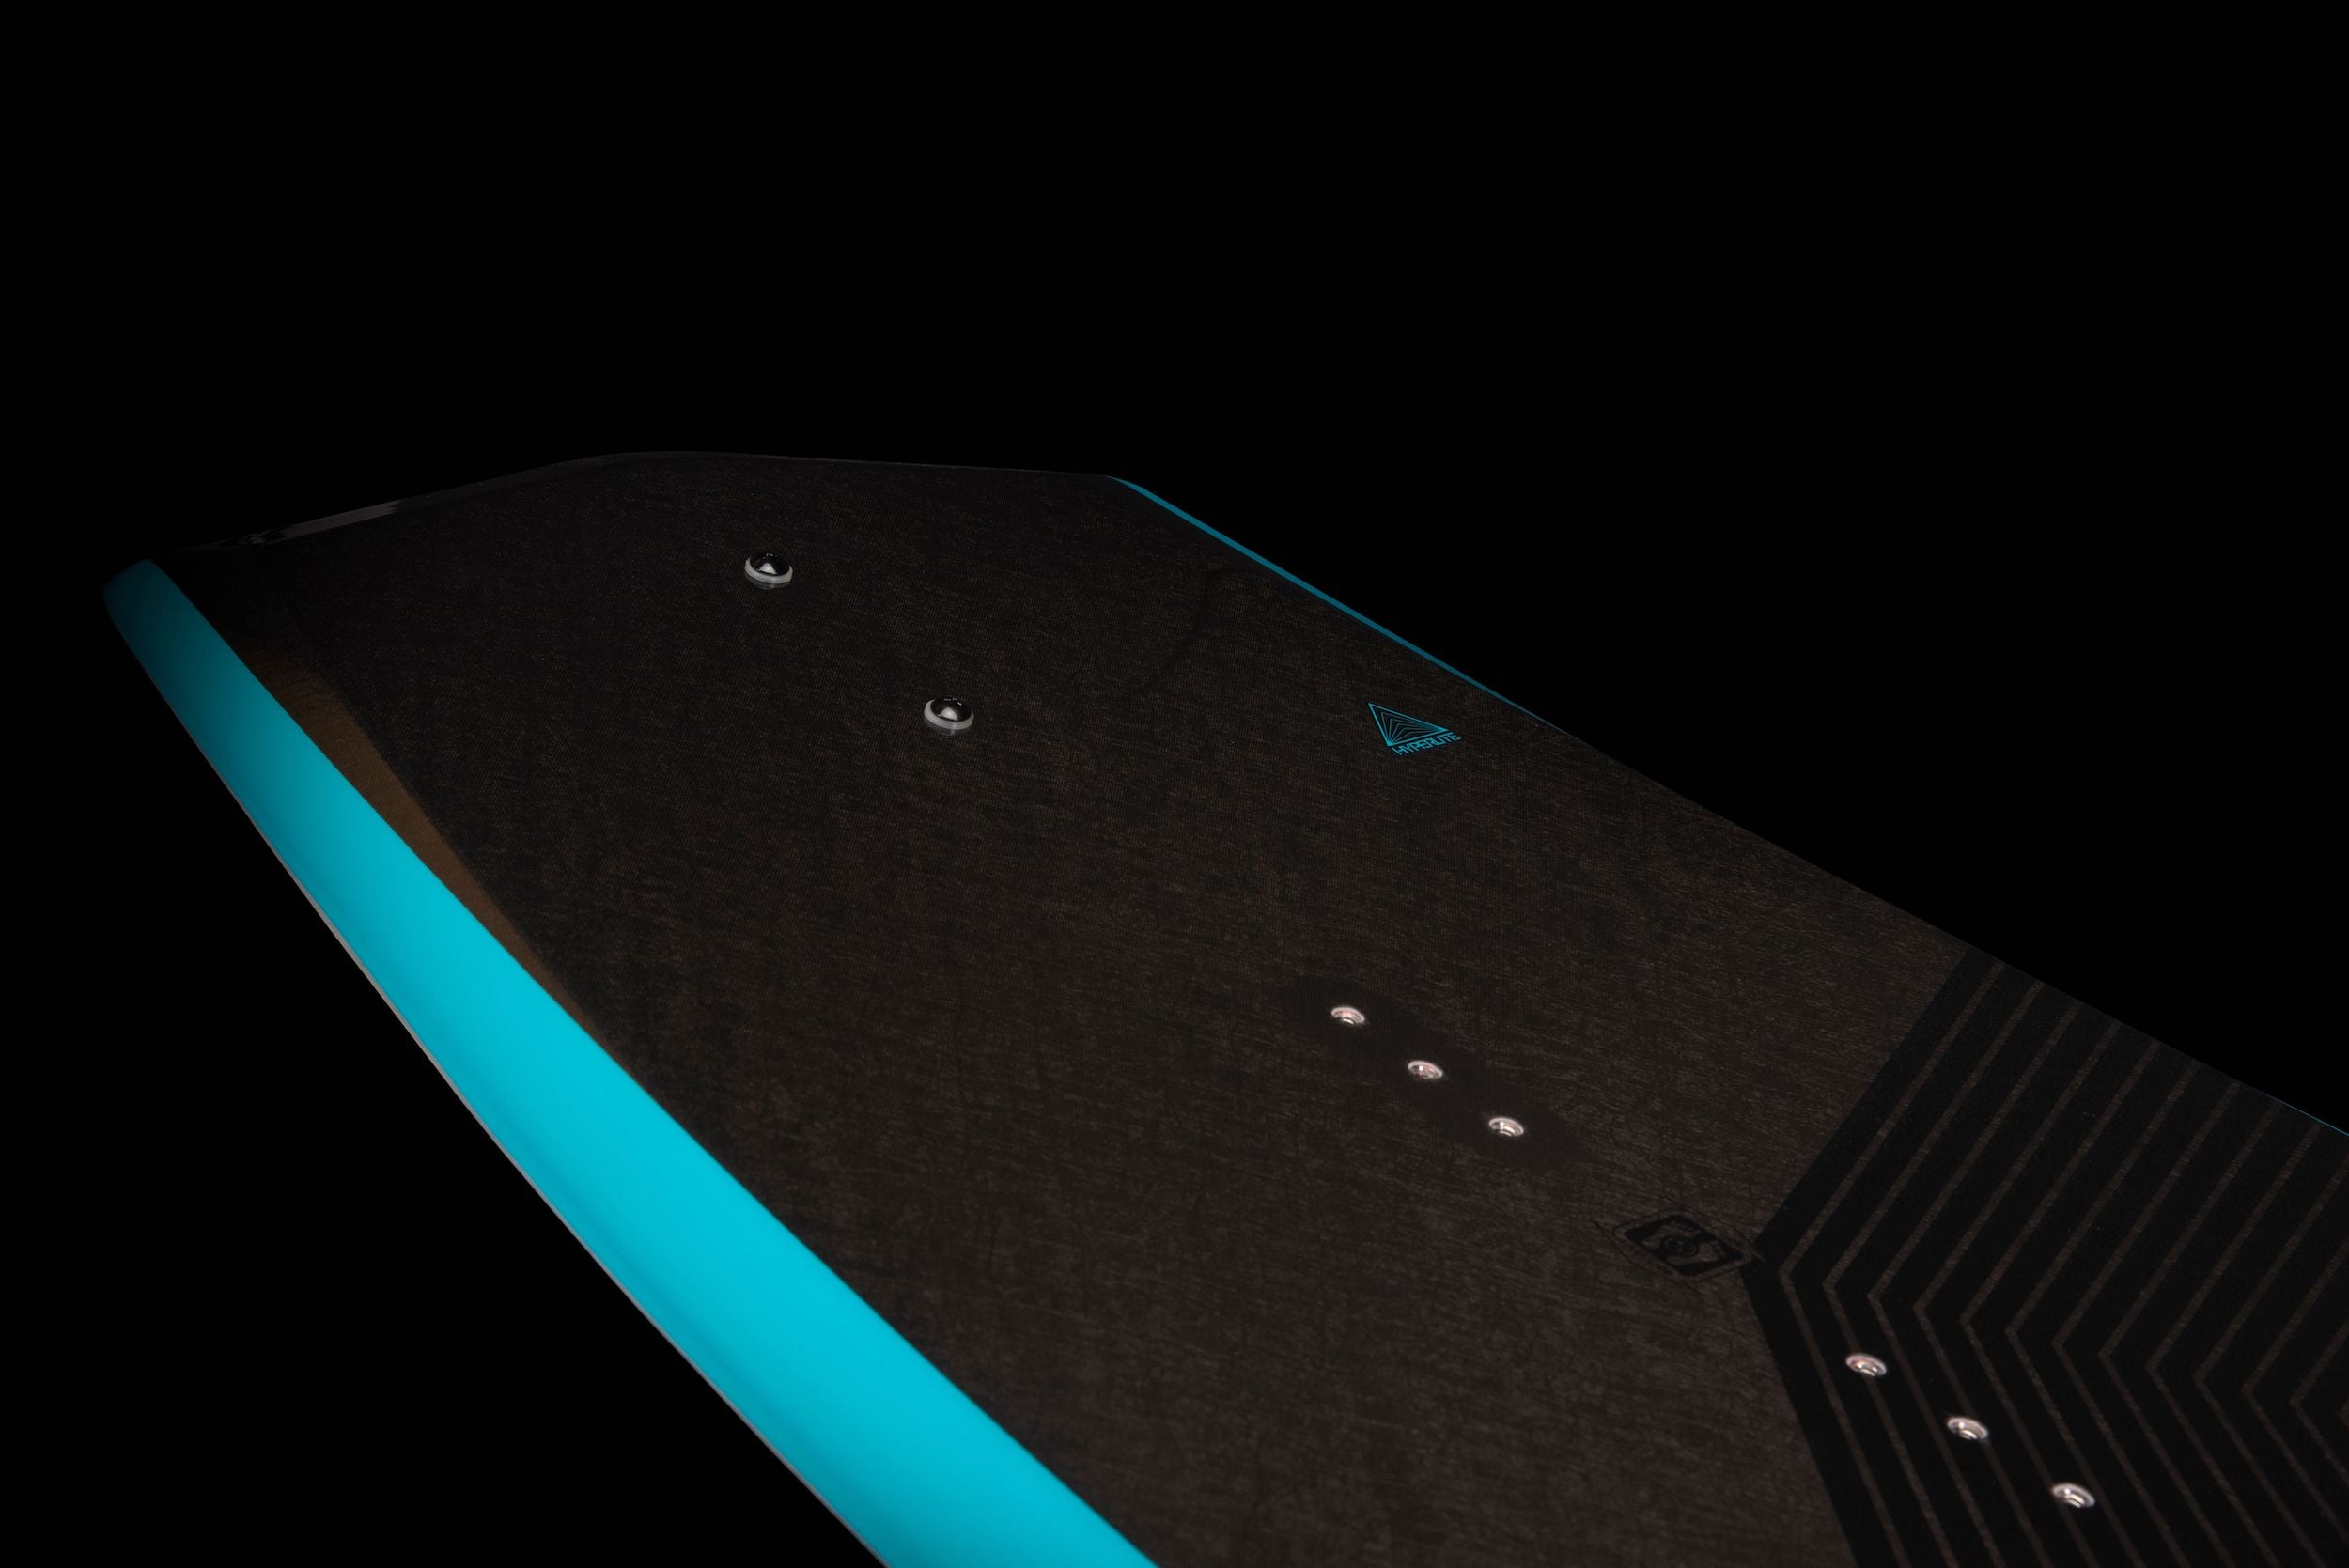 An image of a Hyperlite 2023 State 2.0 wakeboard with an ALL ABILITY LEVEL, featuring a black and blue SHAPE, set against a black background.